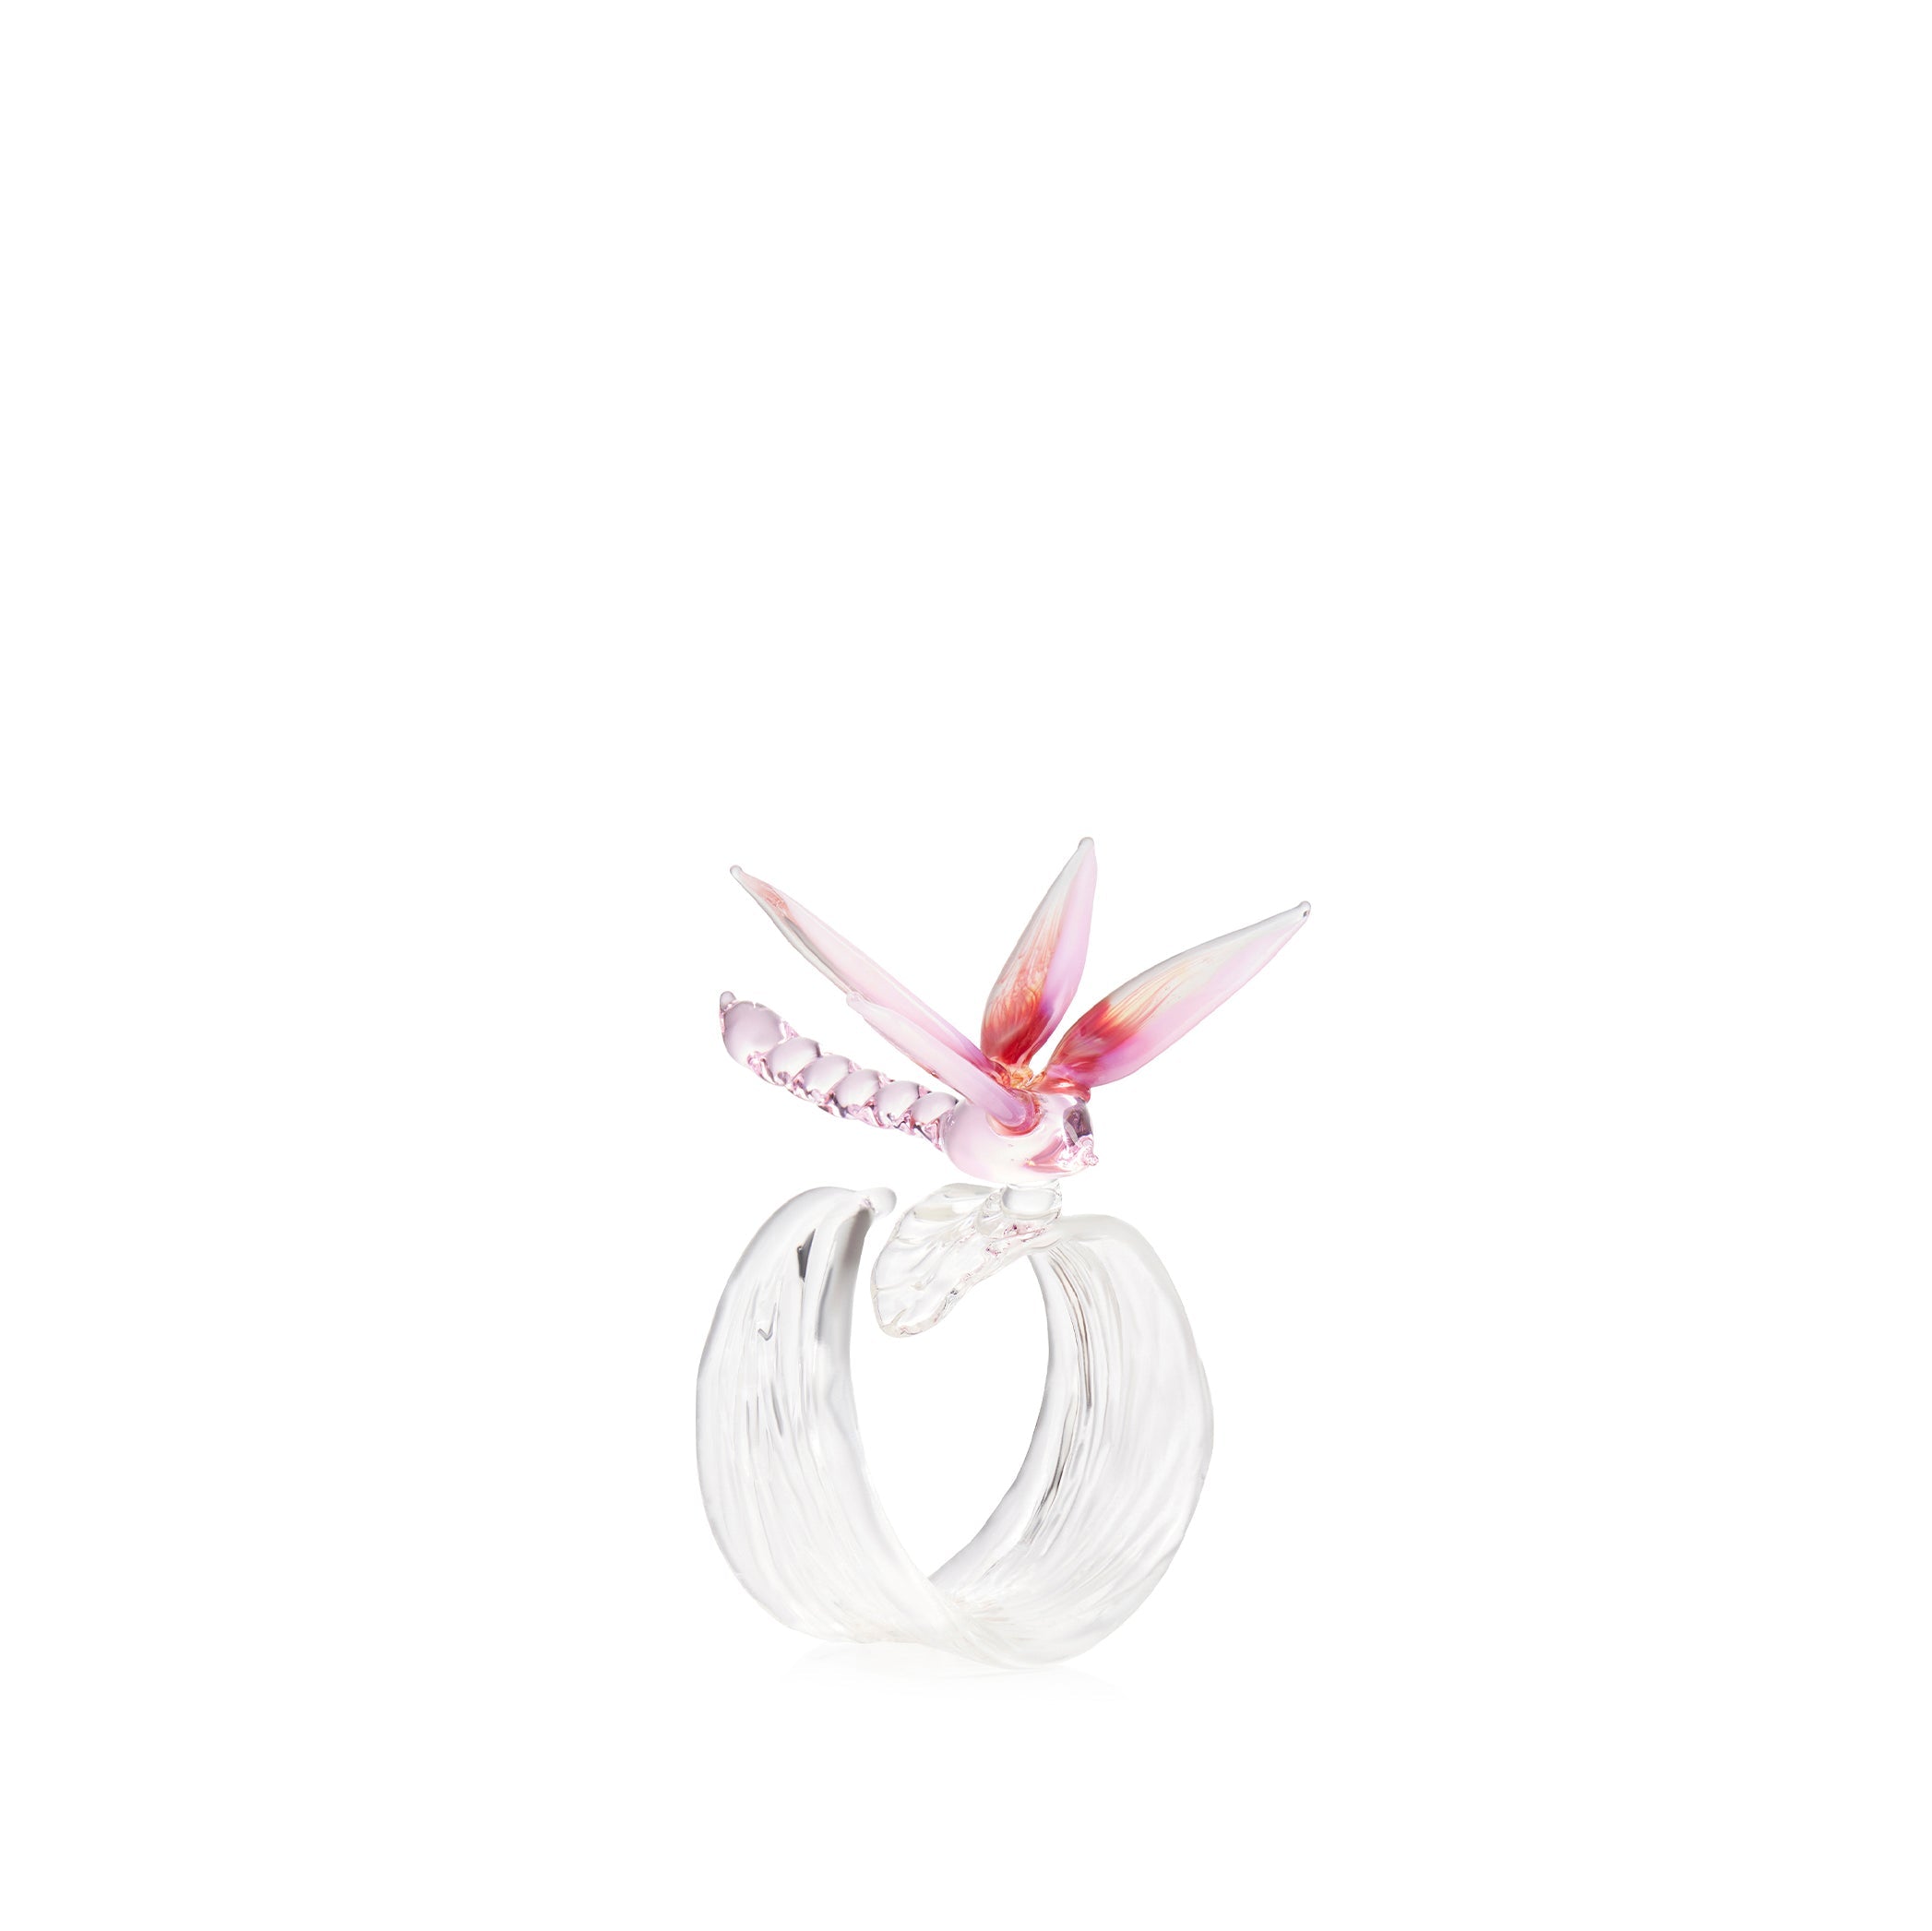 S&B Exclusive Handblown Glass Dragonfly Napkin Ring in Pink